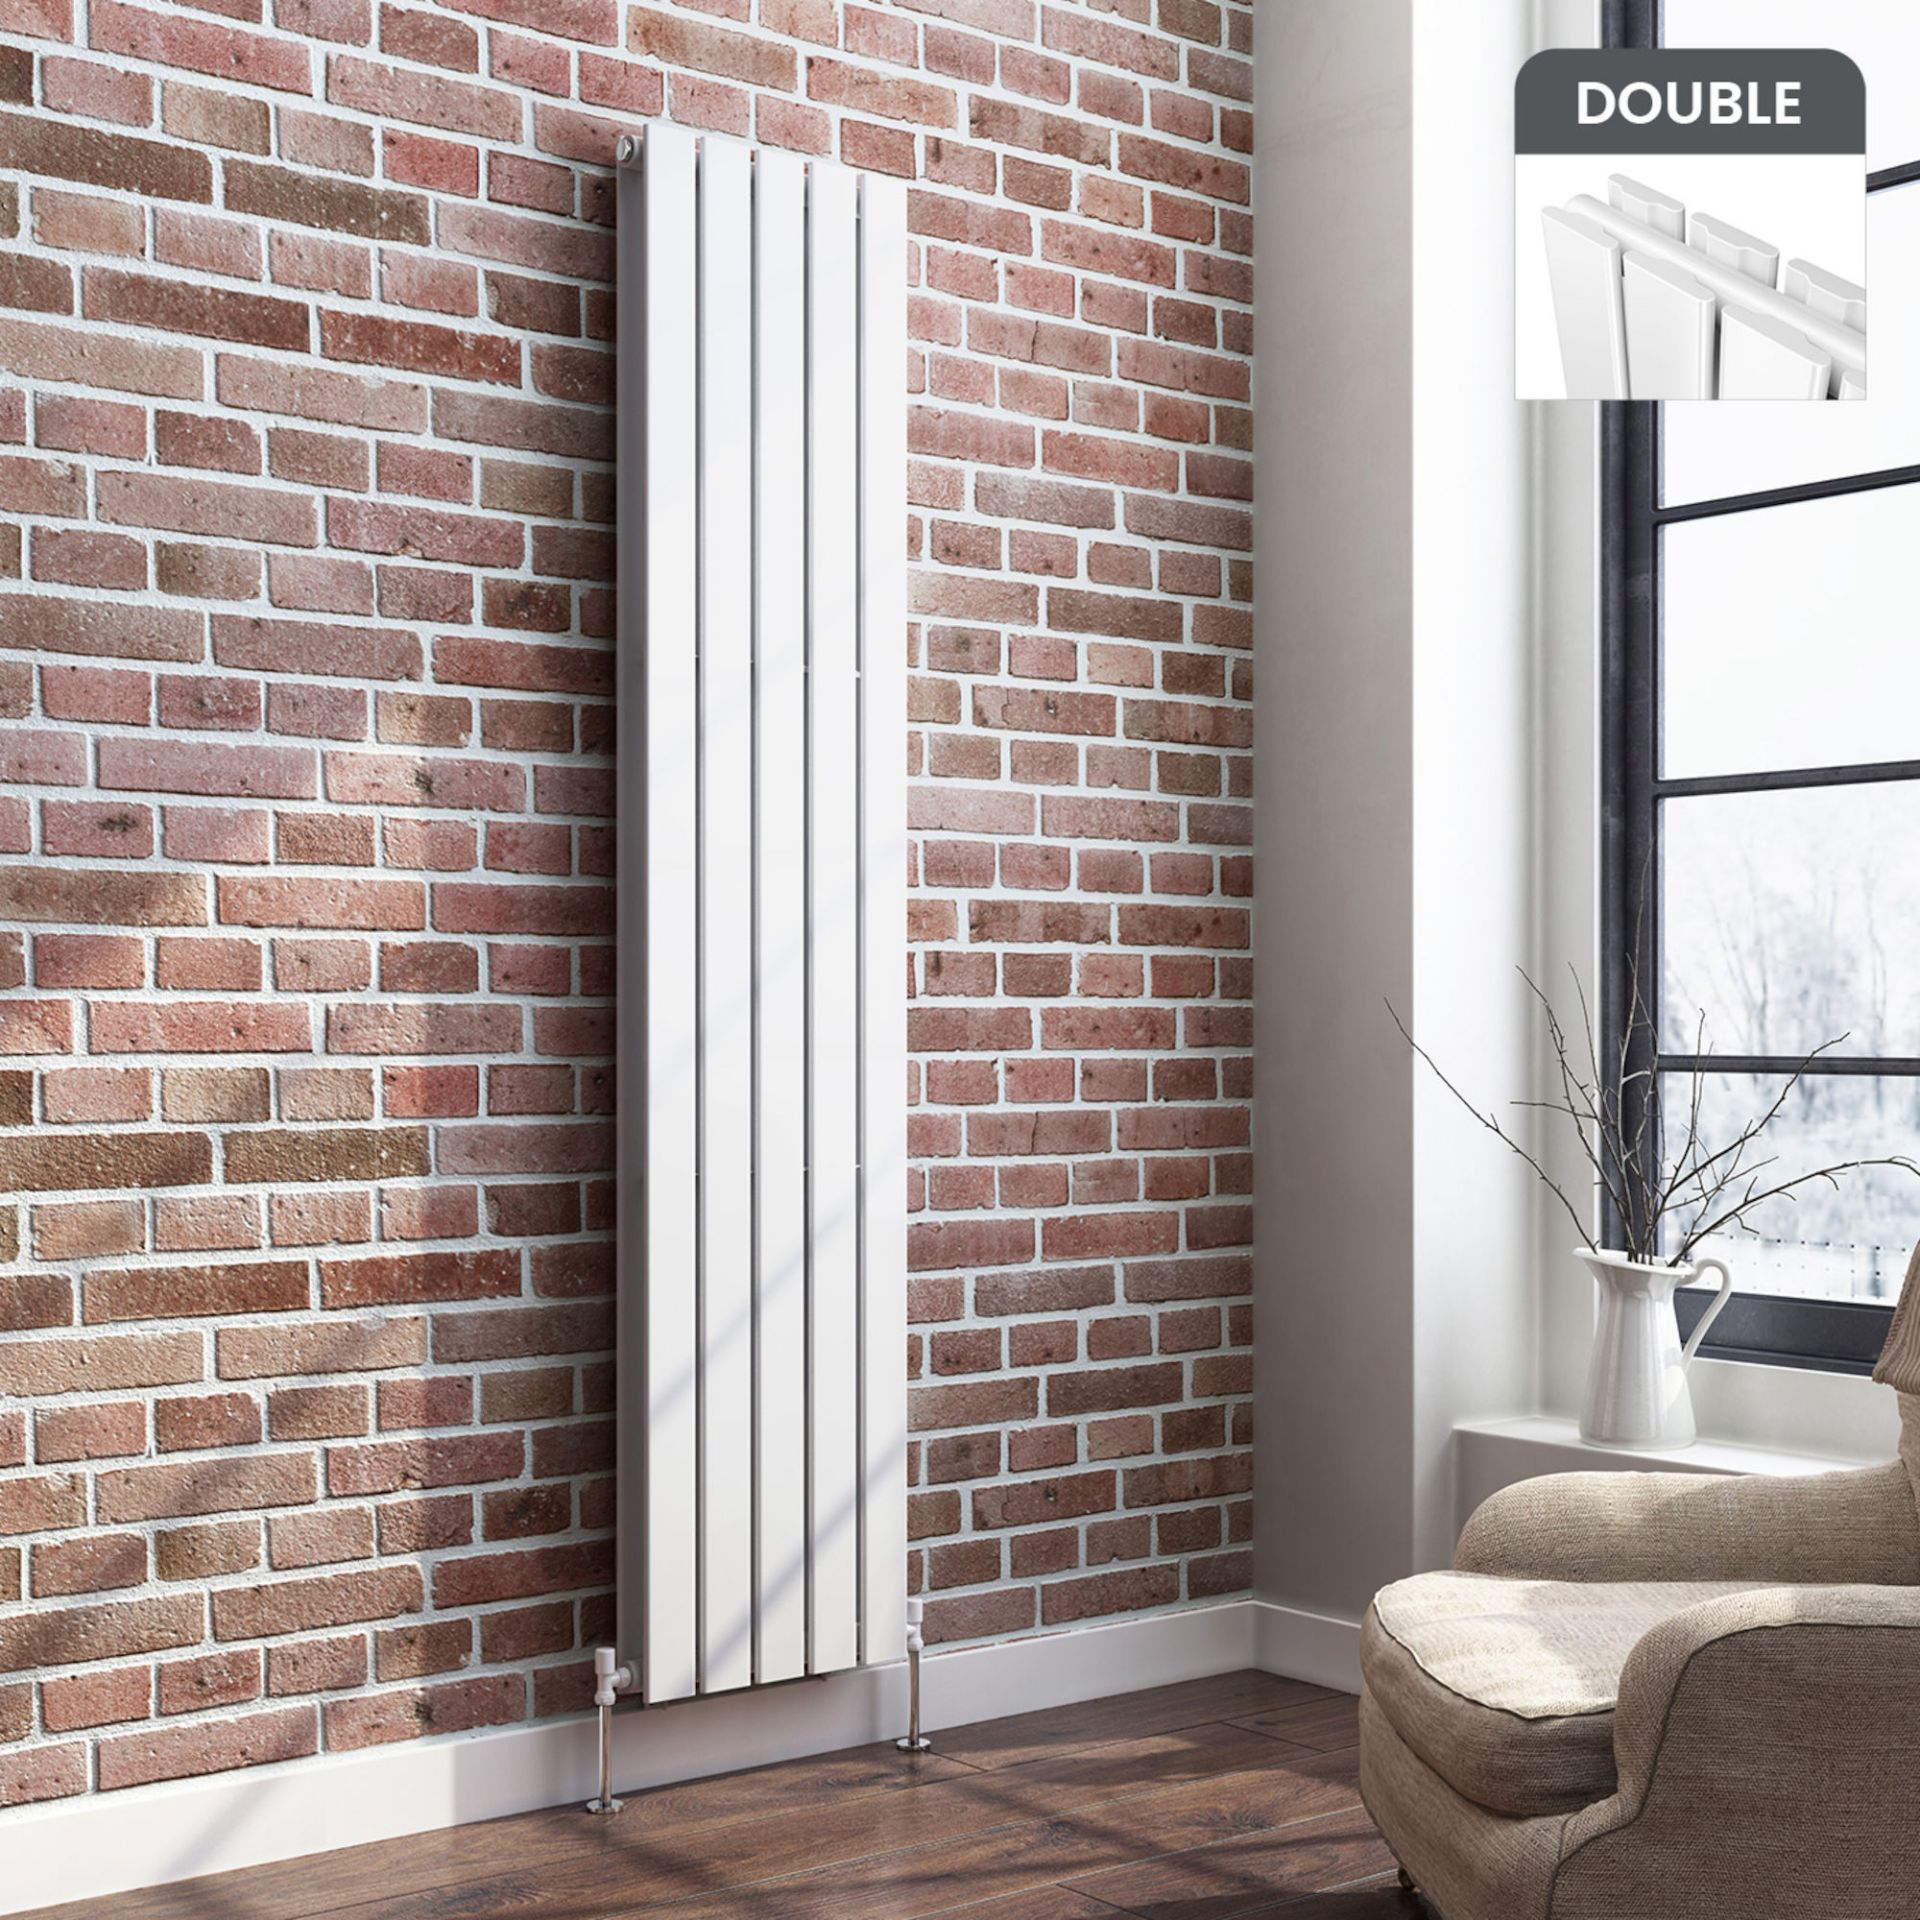 1800x360mm Gloss White Double Flat Panel Vertical Radiator. RRP £449.99. Made with low carbon